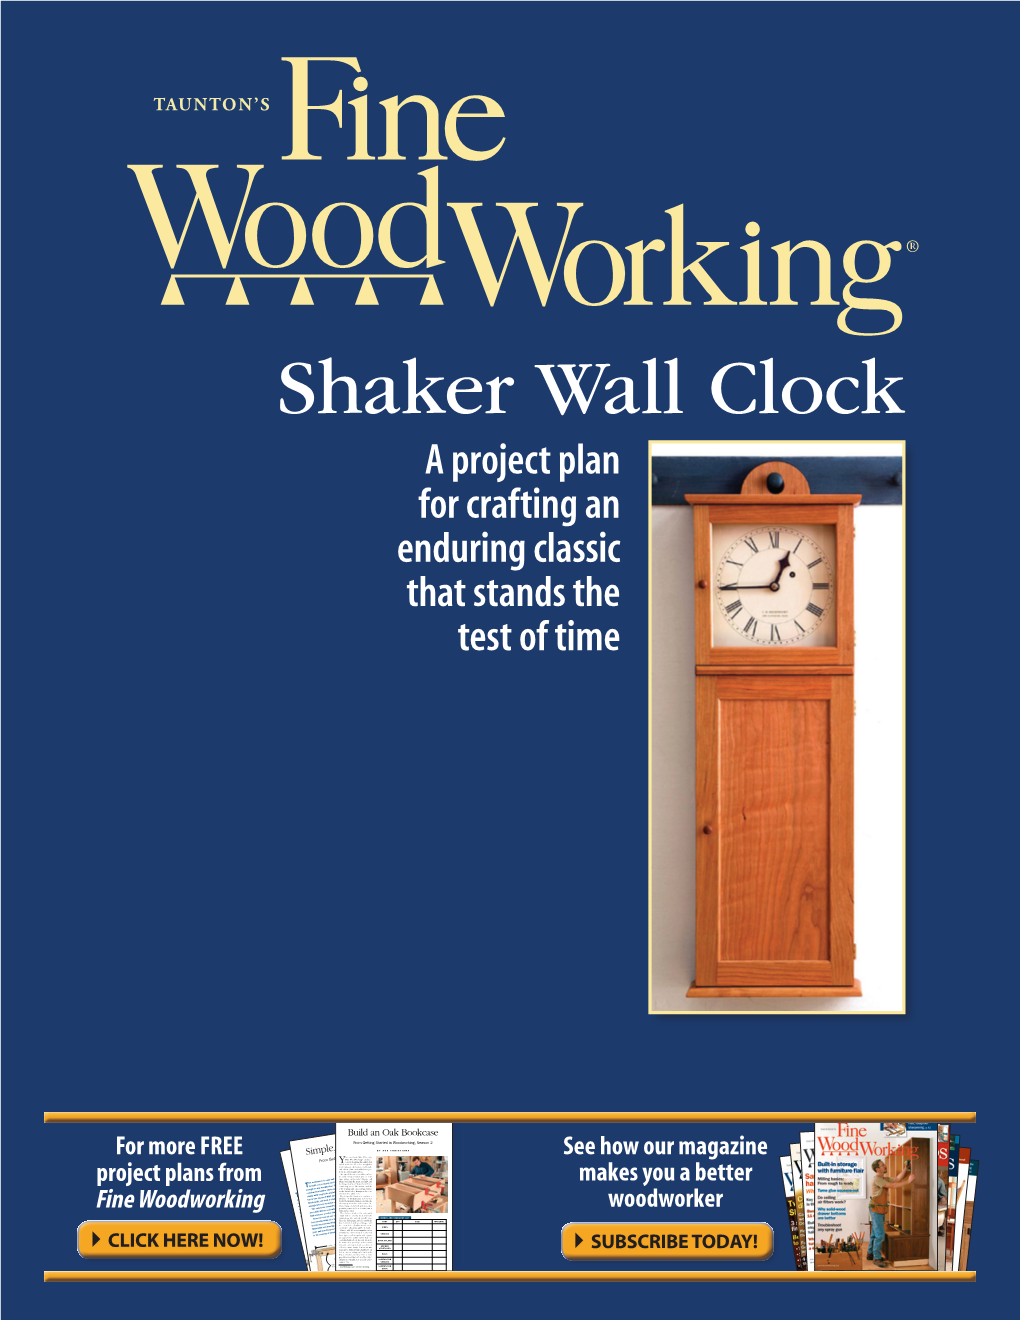 Shaker Wall Clock a Project Plan for Crafting an Enduring Classic That Stands the Test of Time